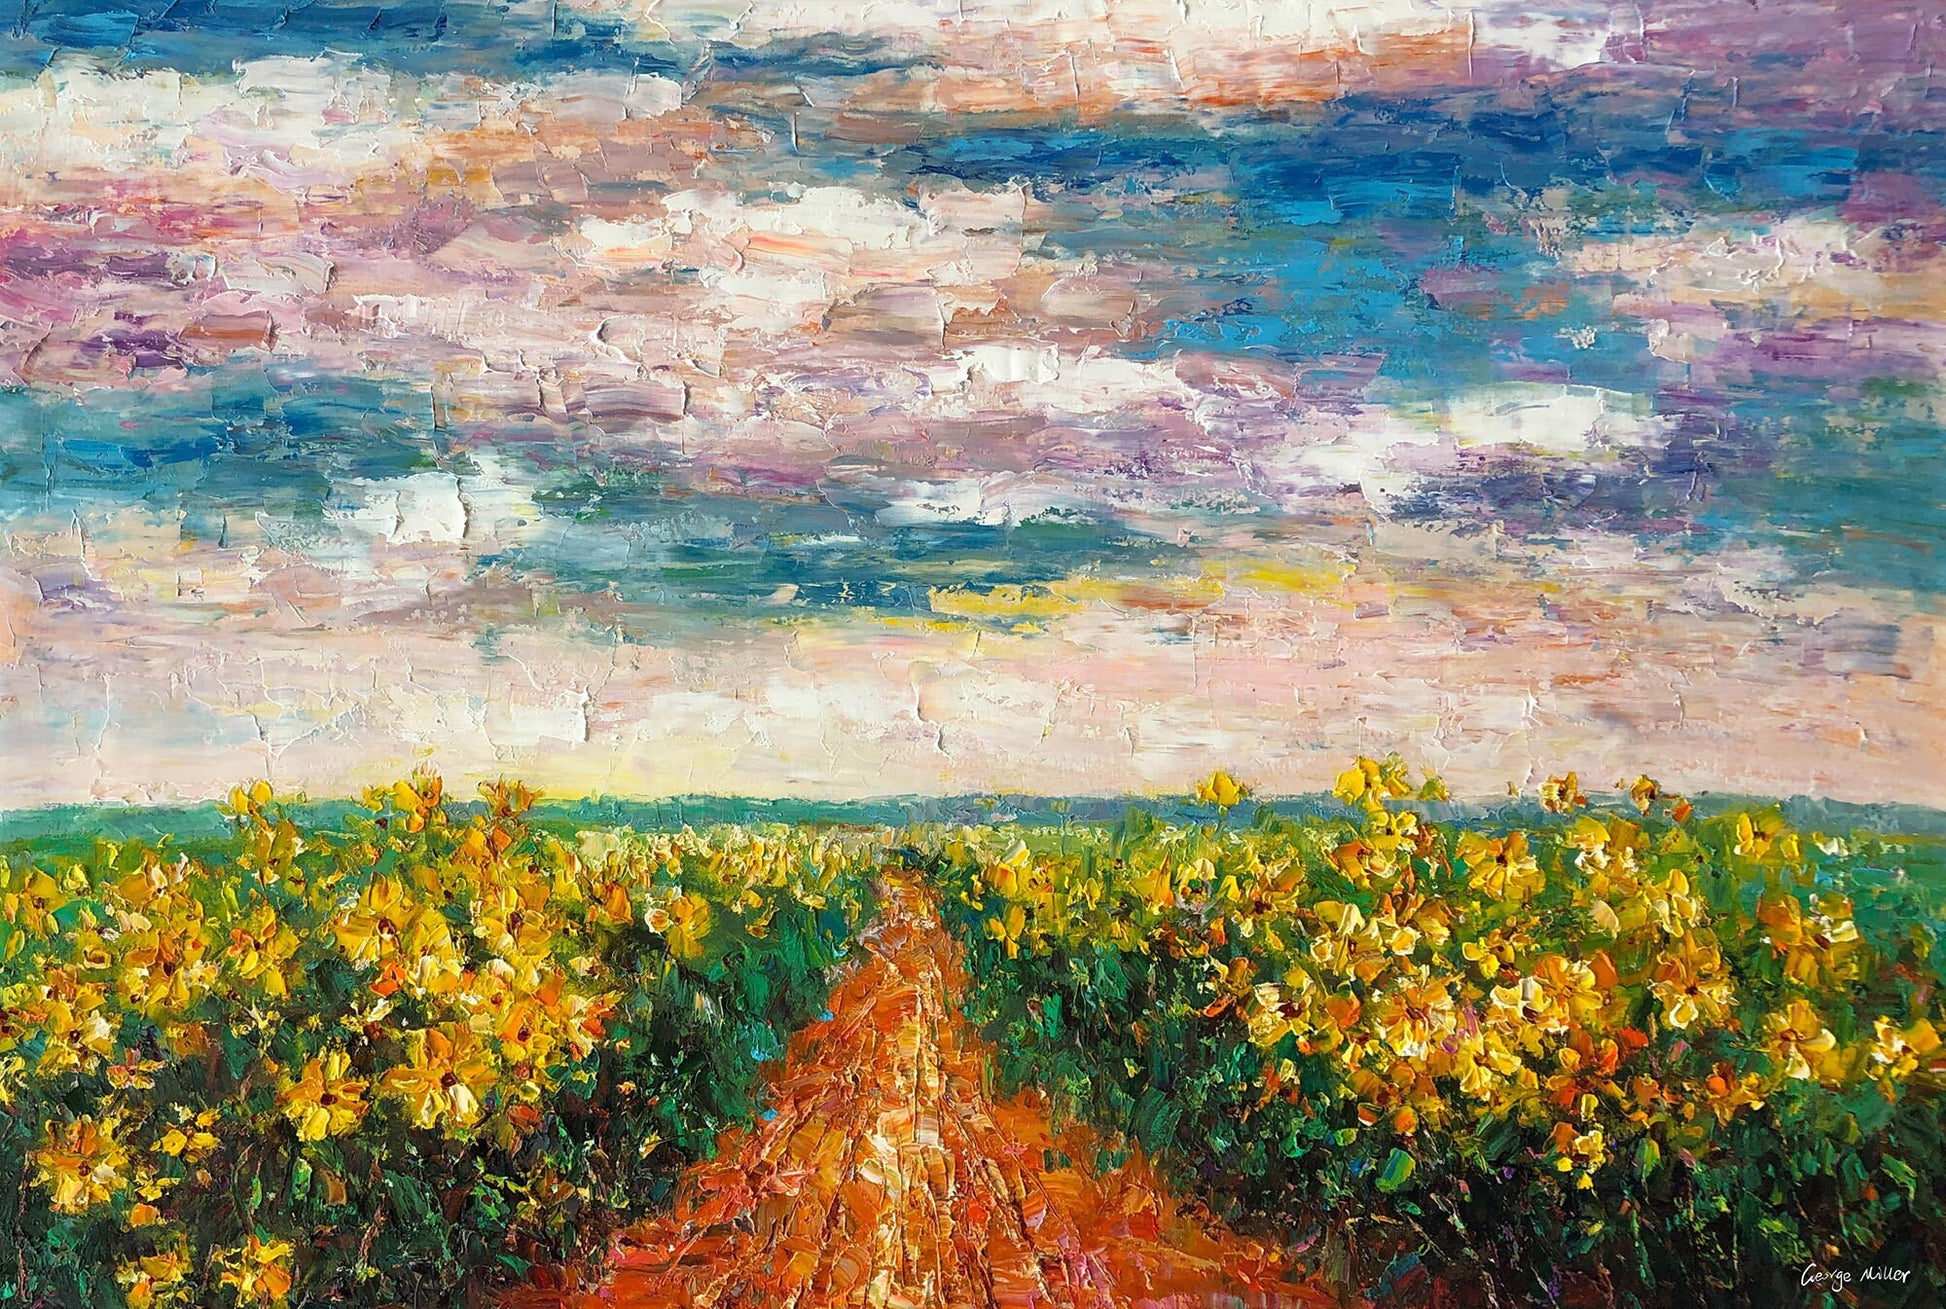 Large Oil Painting, Large Art, Sunflower Field French Landscape Painting, Palette Knife Art, Abstract Canvas Painting, Oil Painting Art